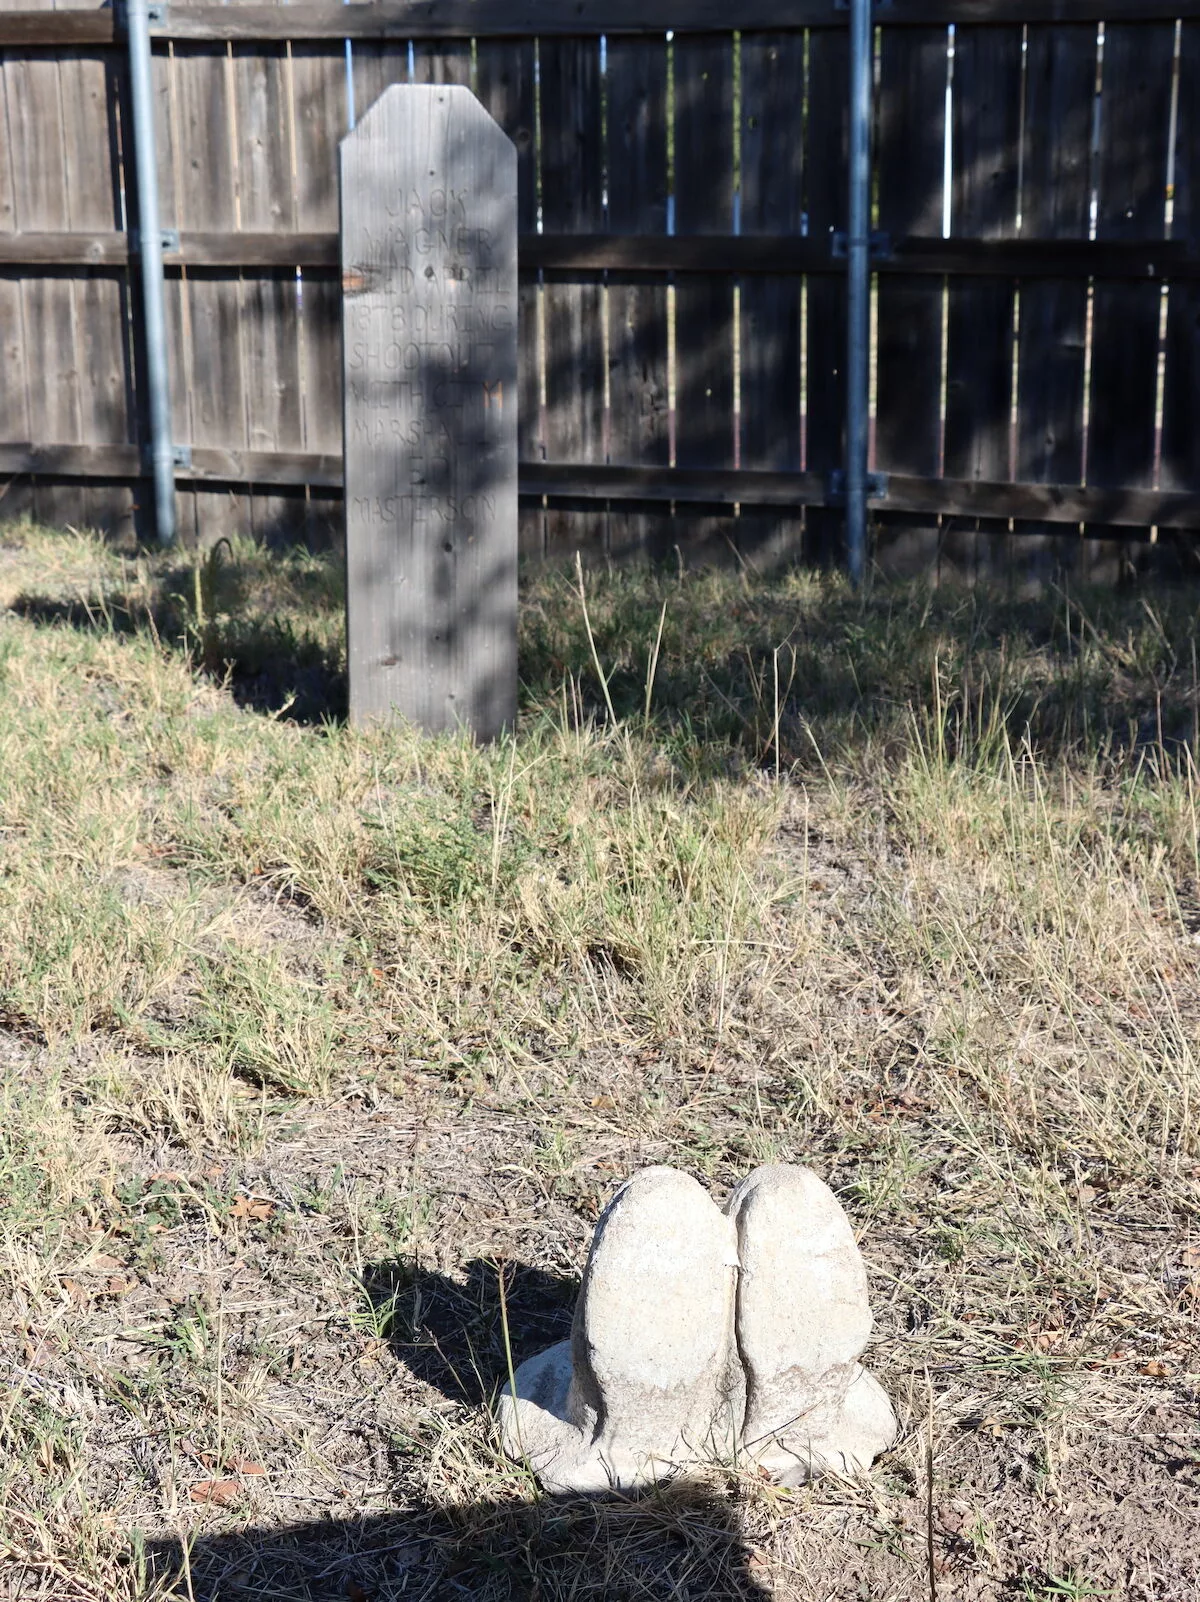 Replica boots in the ground at Boot Hill Cemetery at the Boot Hill Museum in Dodge City, Kansas